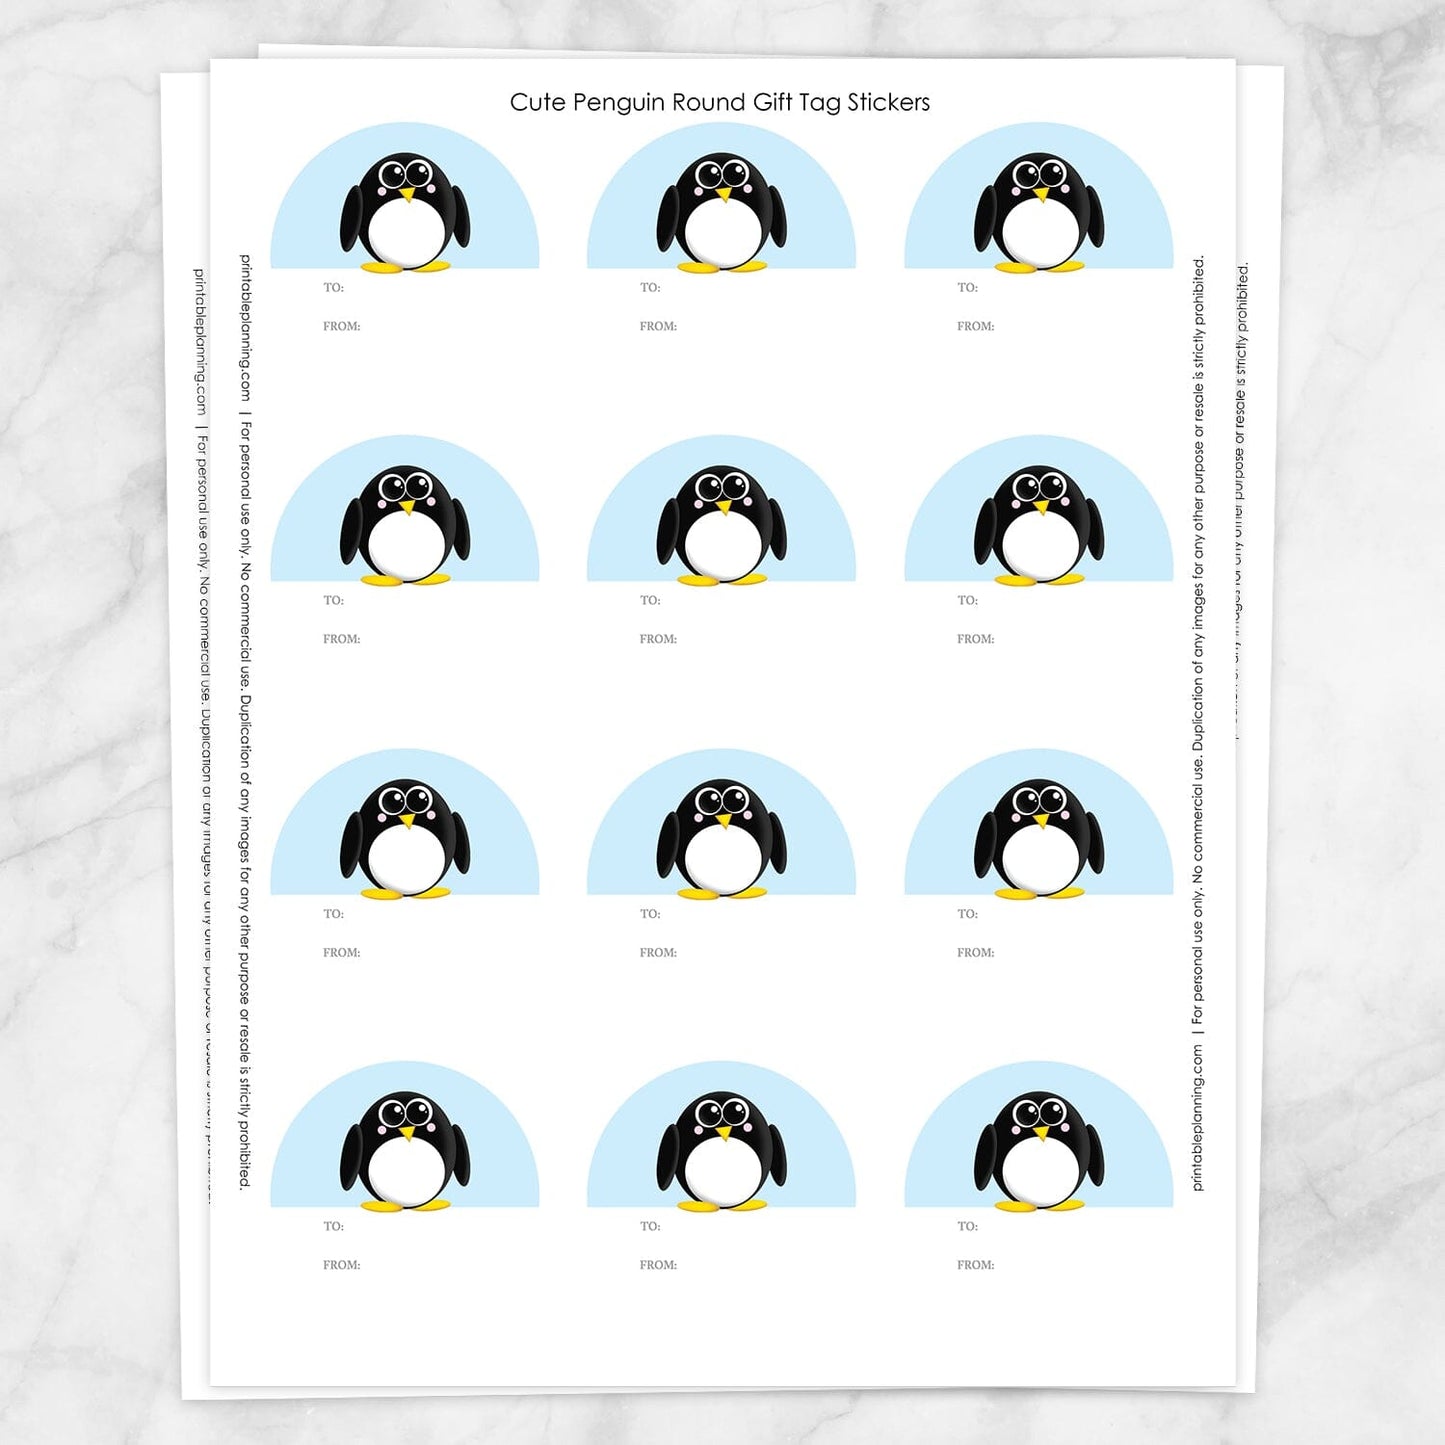 Printable Cute Penguin Gift Tag Stickers at Printable Planning. Sheet of 12 stickers.